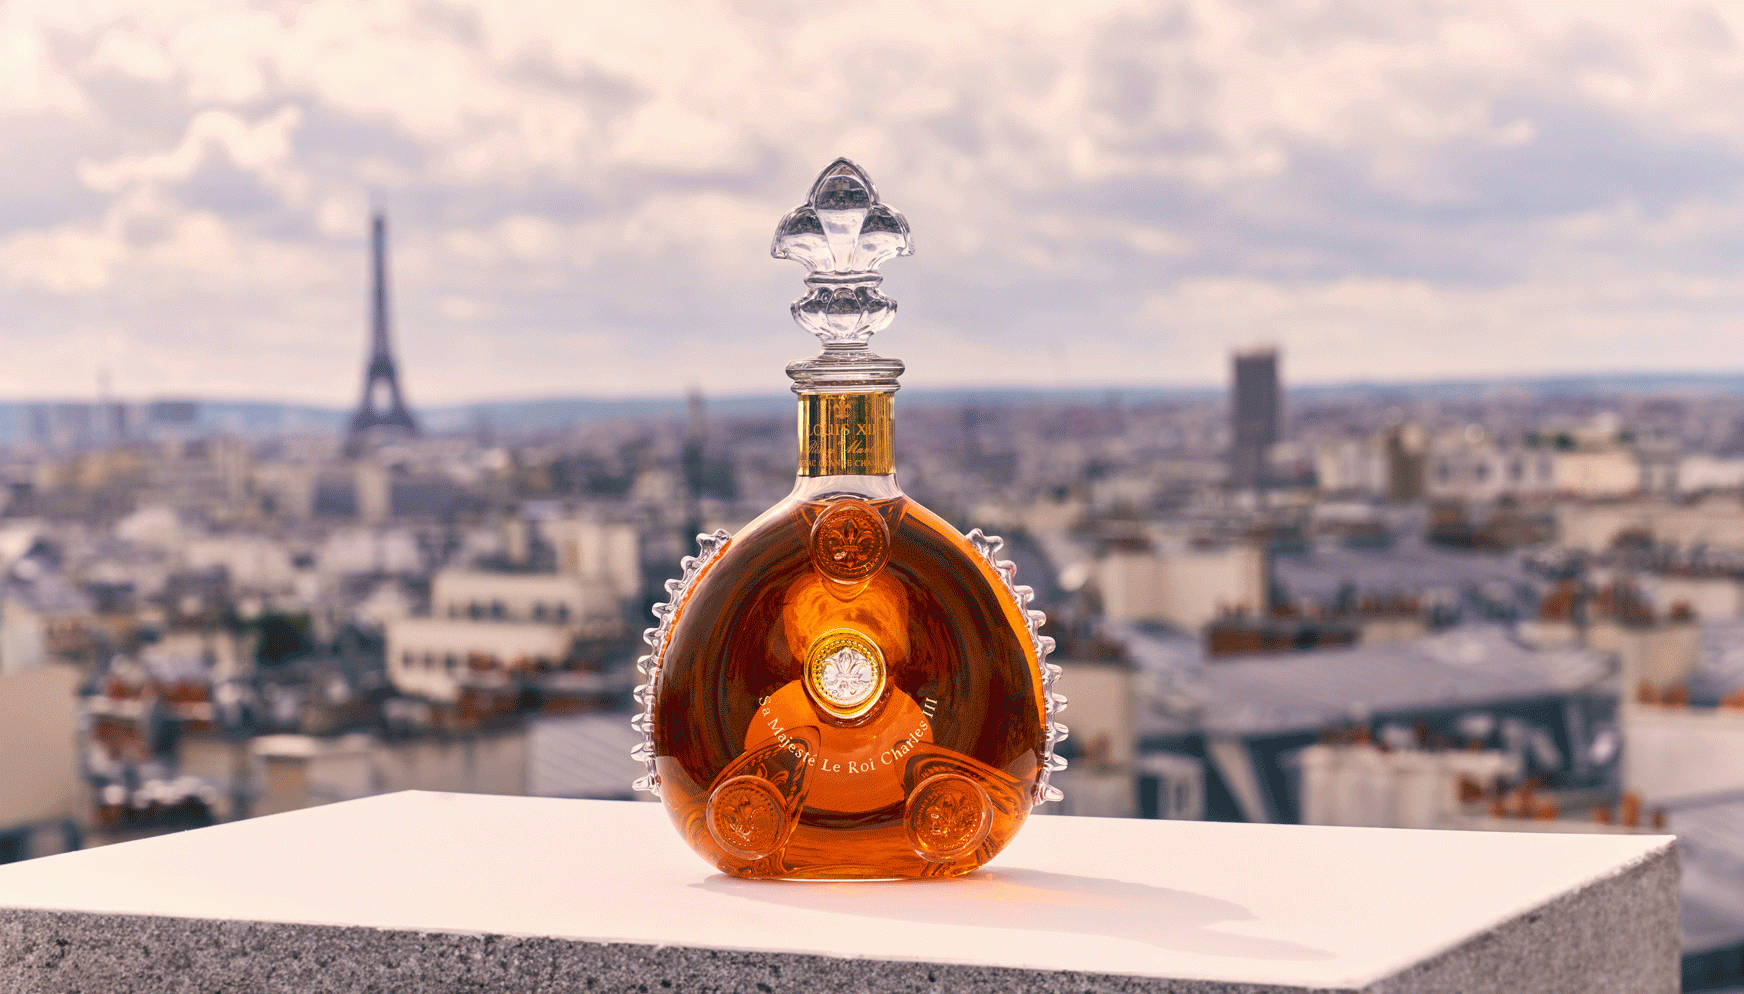 LOUIS XIII, The King of Cognac, in Honour of His Majesty The King Charles  III - Spirits Platform